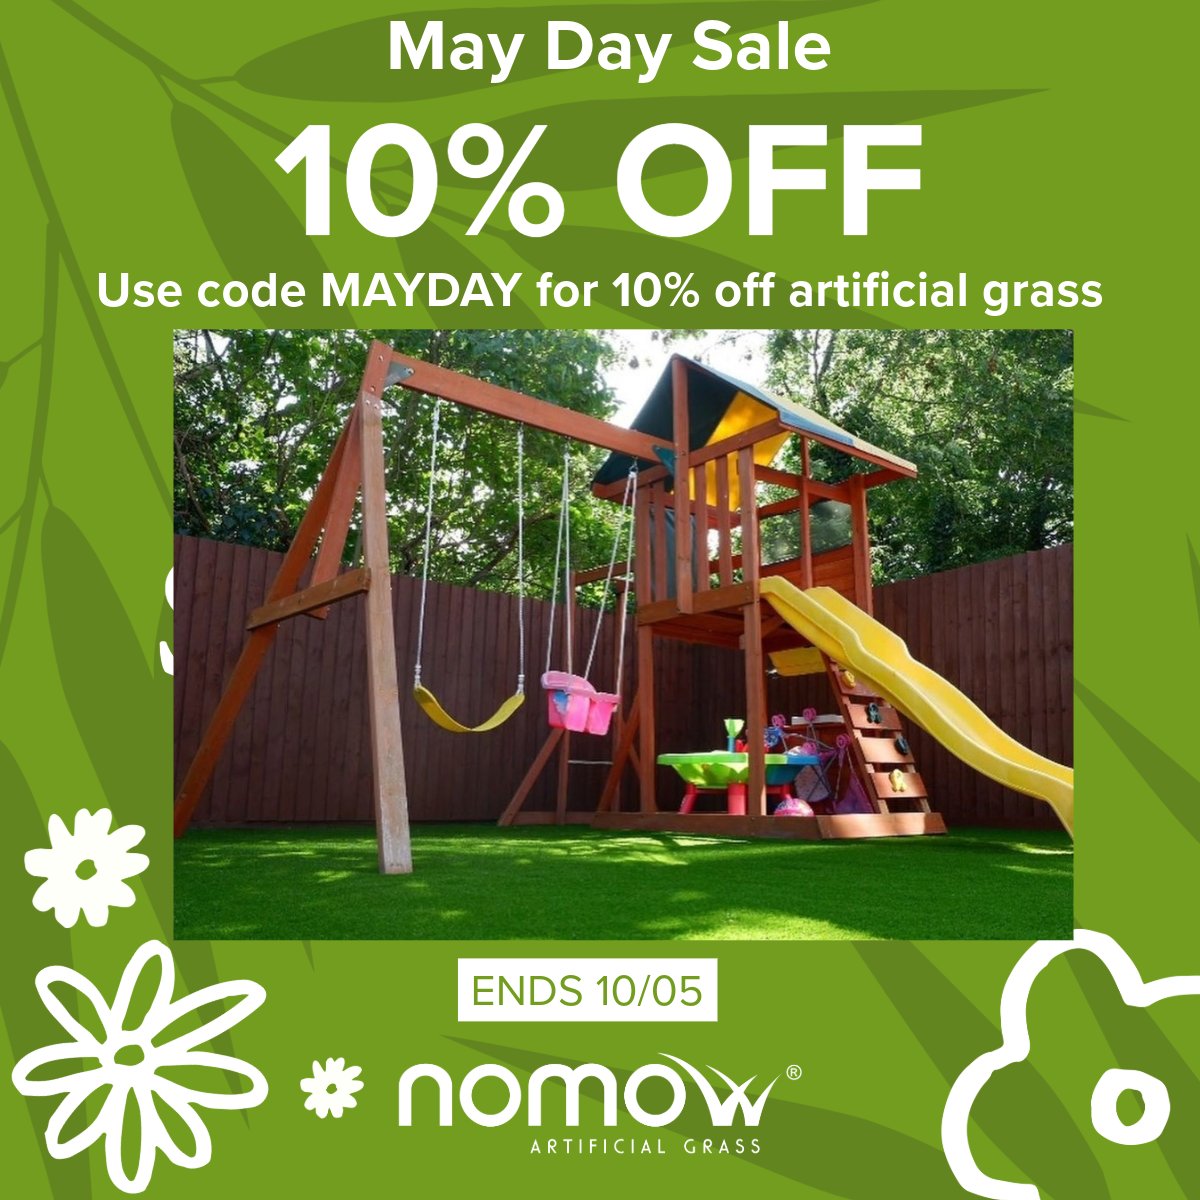 Save 10% this week using code 'MAYDAY' 🌸

Be quick - code expires on 10th May 🌿

 #Nomow #ArtificialGrass #Gardening #usecode #buytoday #springiscoming